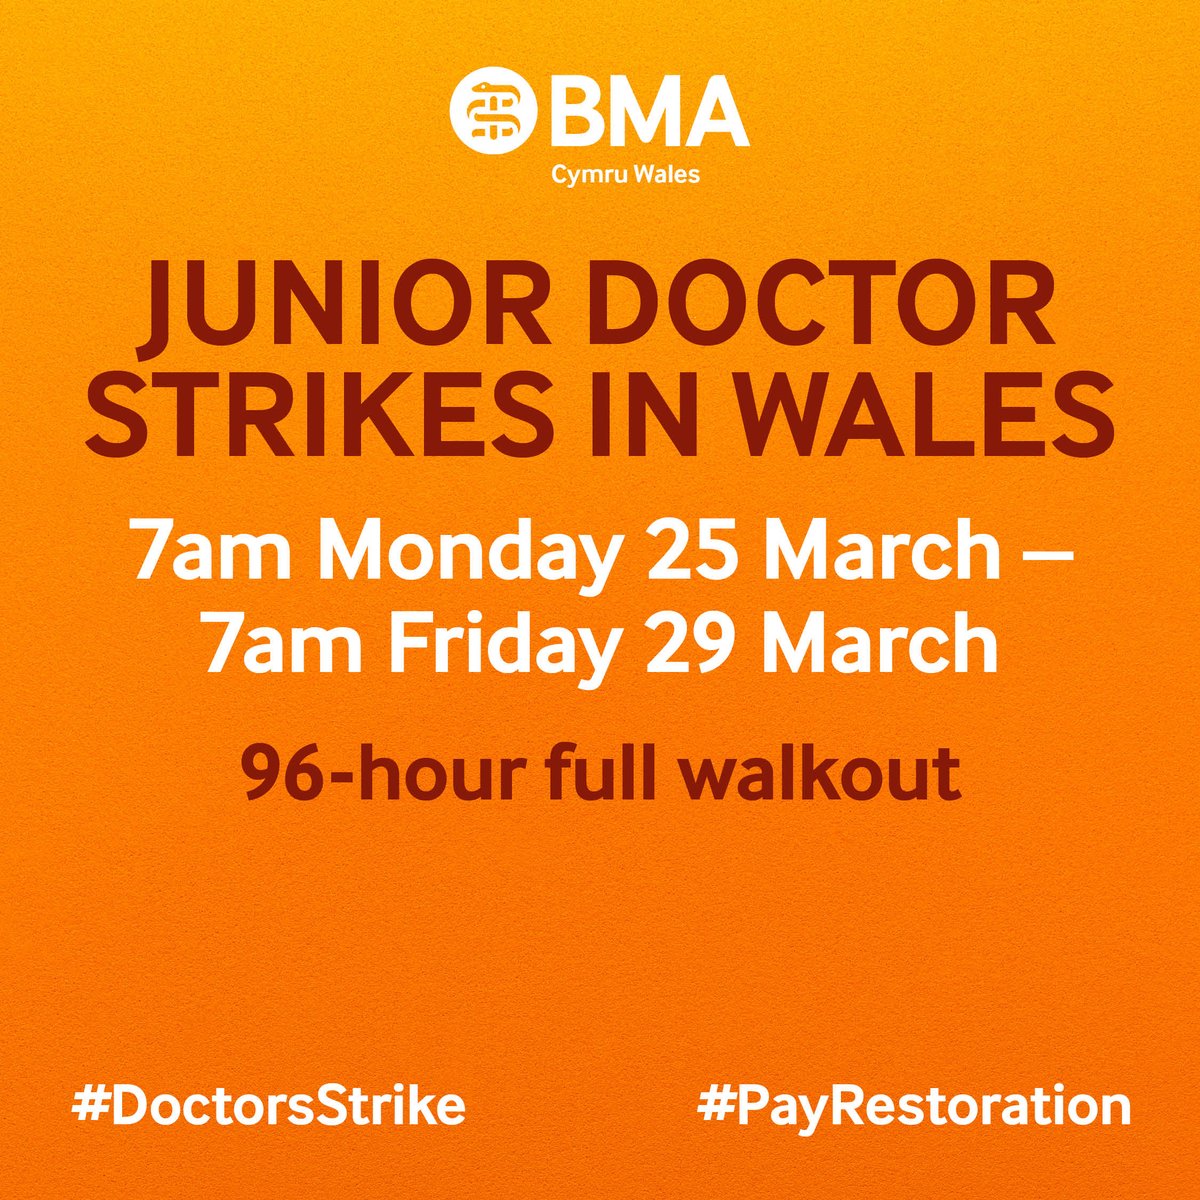 🏴󠁧󠁢󠁷󠁬󠁳󠁿 🪧 Junior doctors in Wales begin 96-hour full walkout over pay Press release: ➡️ bit.ly/4a73ets